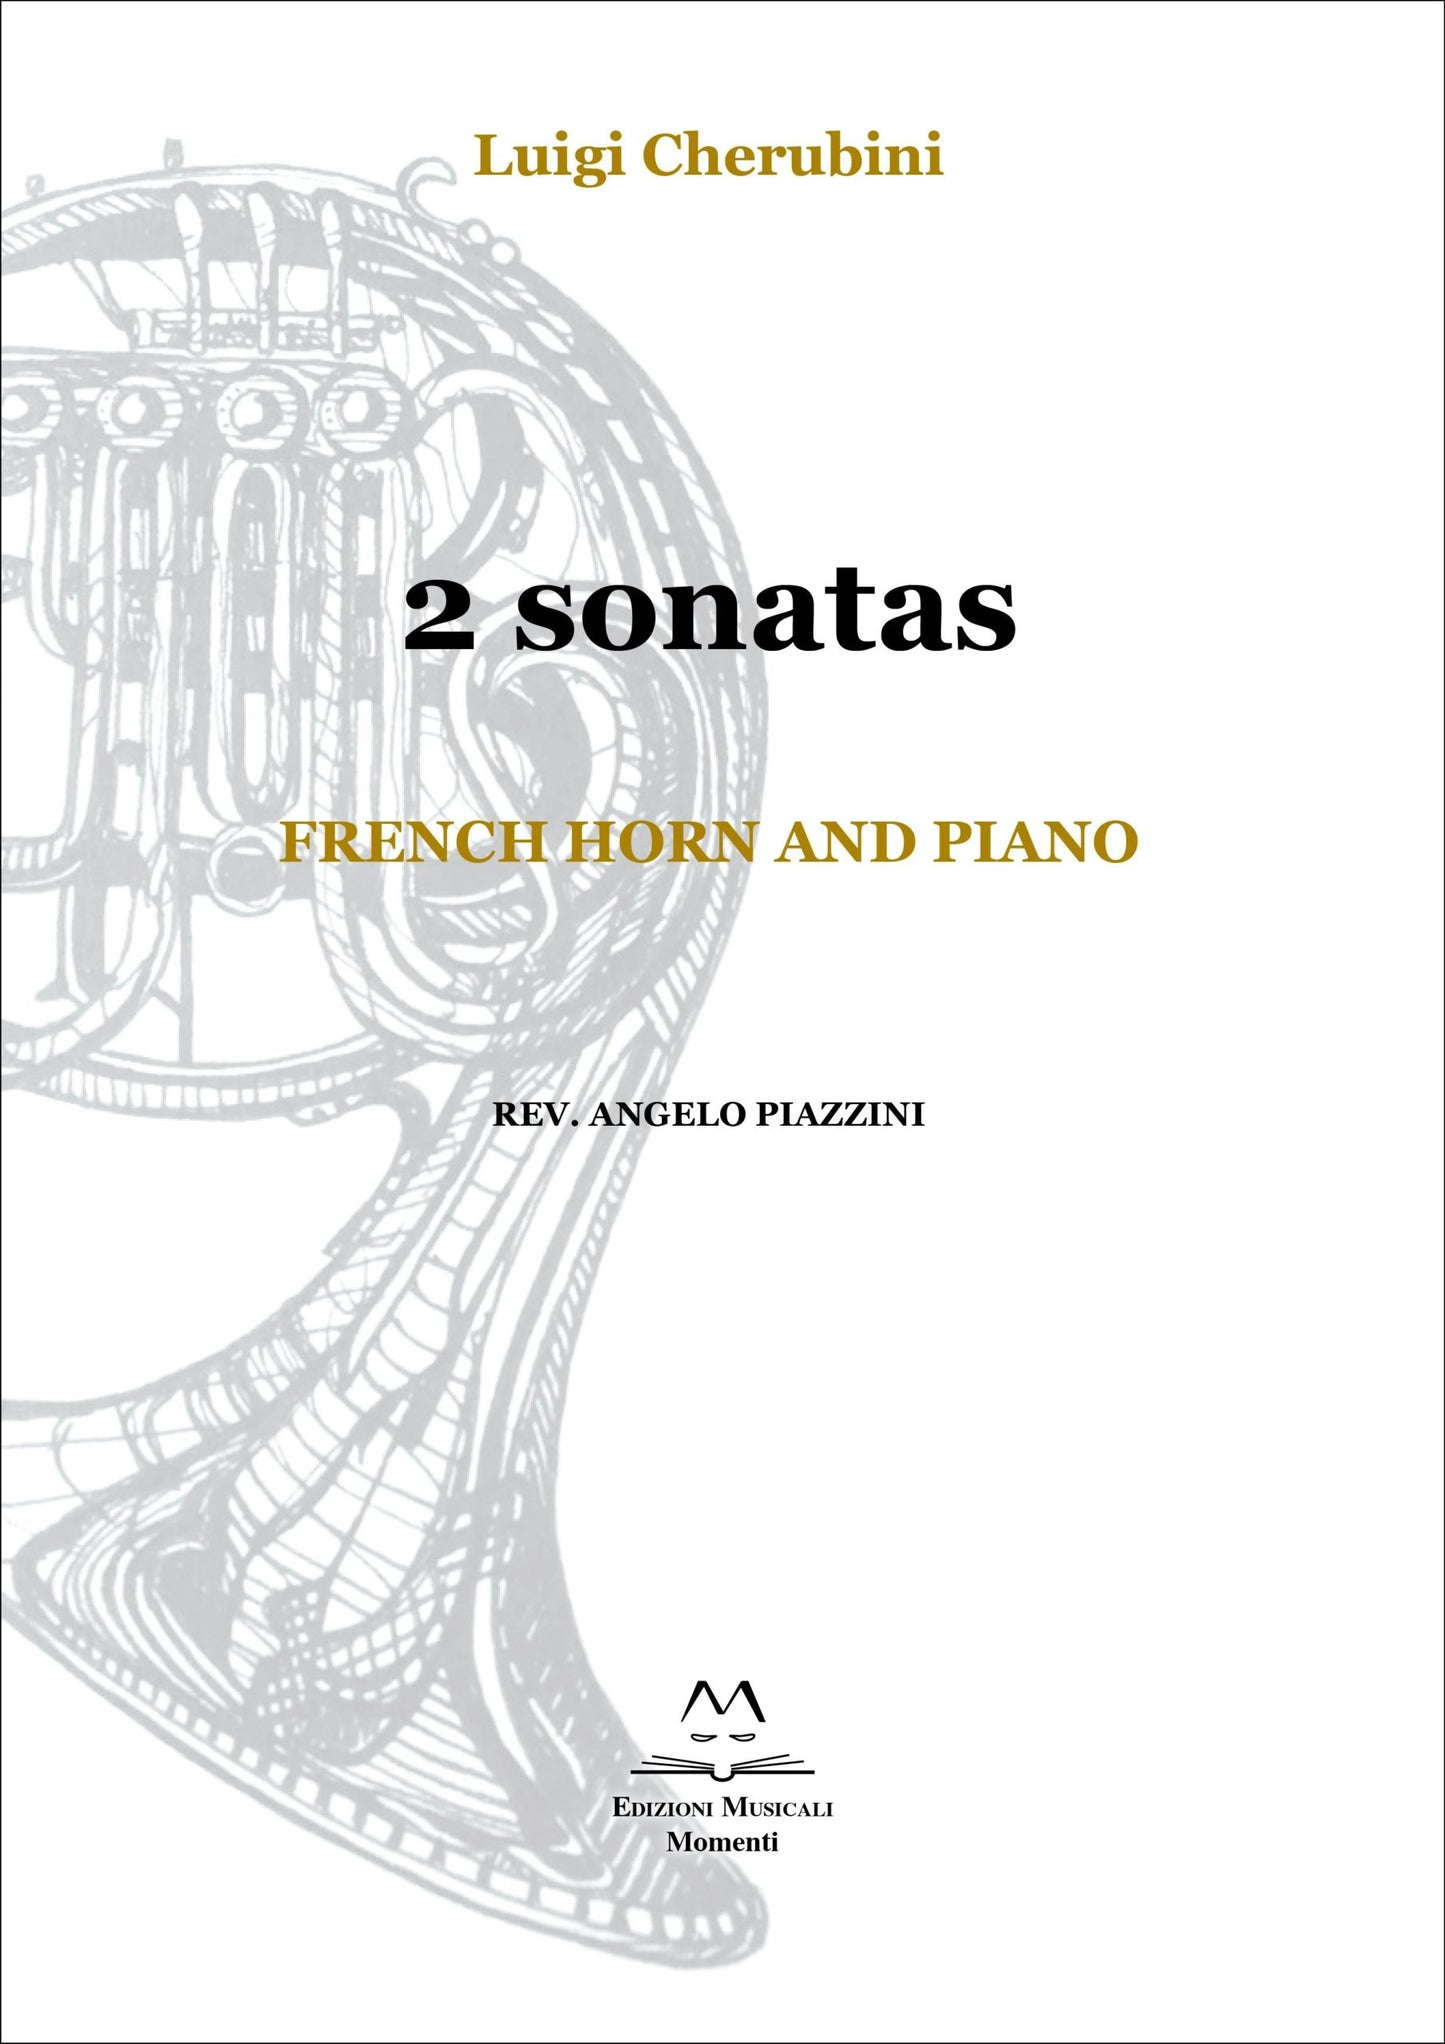 2 sonatas. French horn and piano rev. Angelo Piazzini